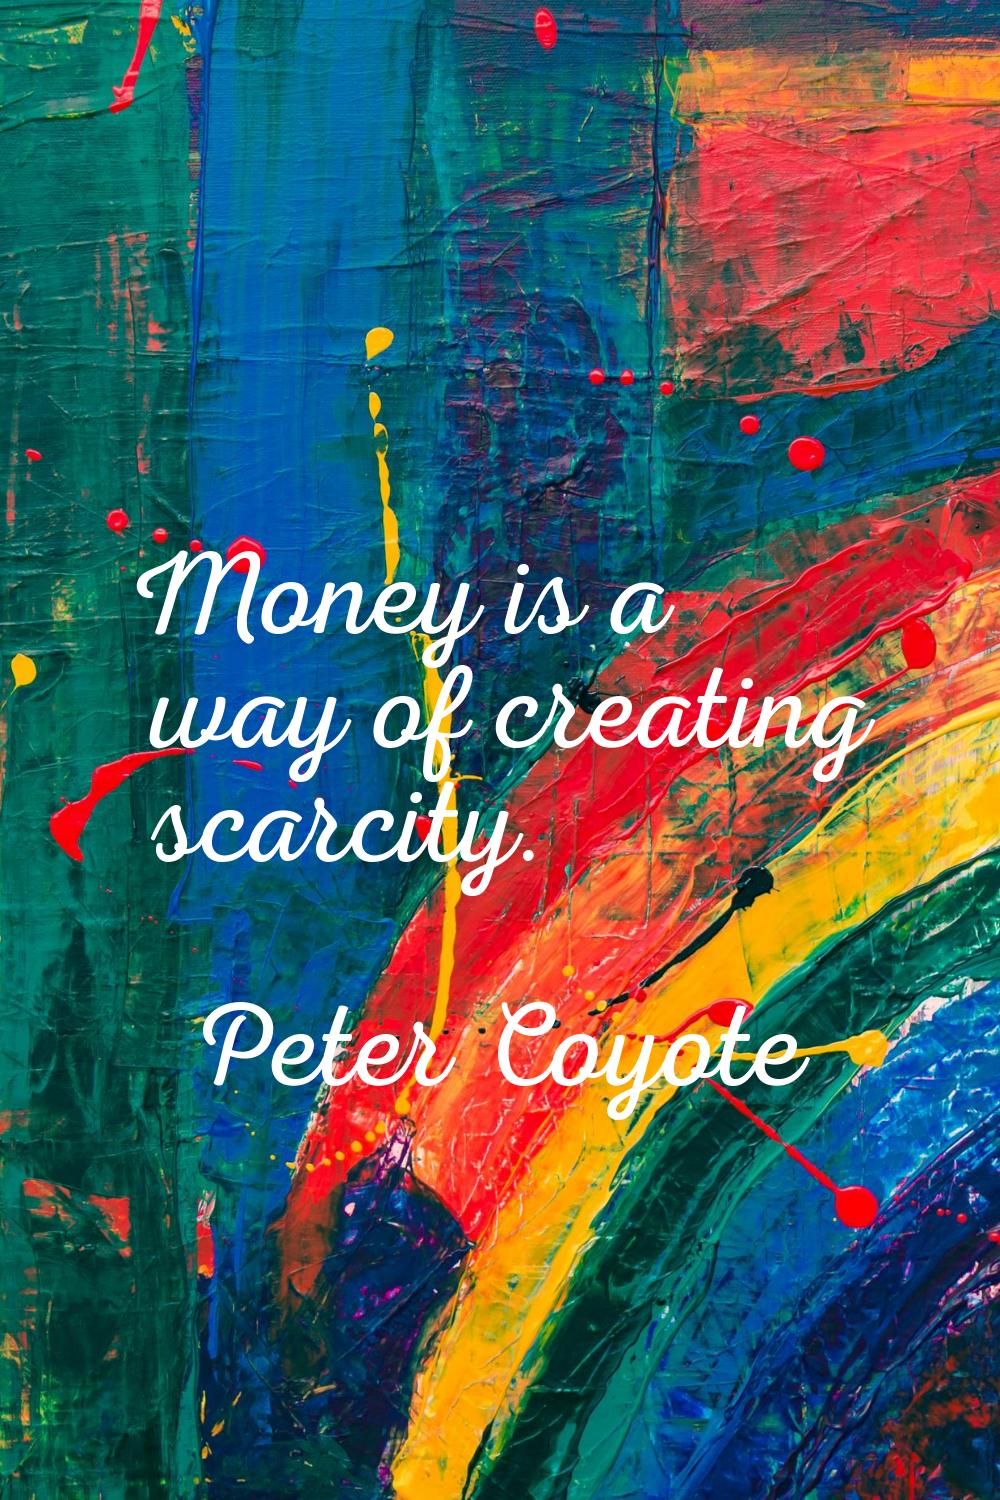 Money is a way of creating scarcity.